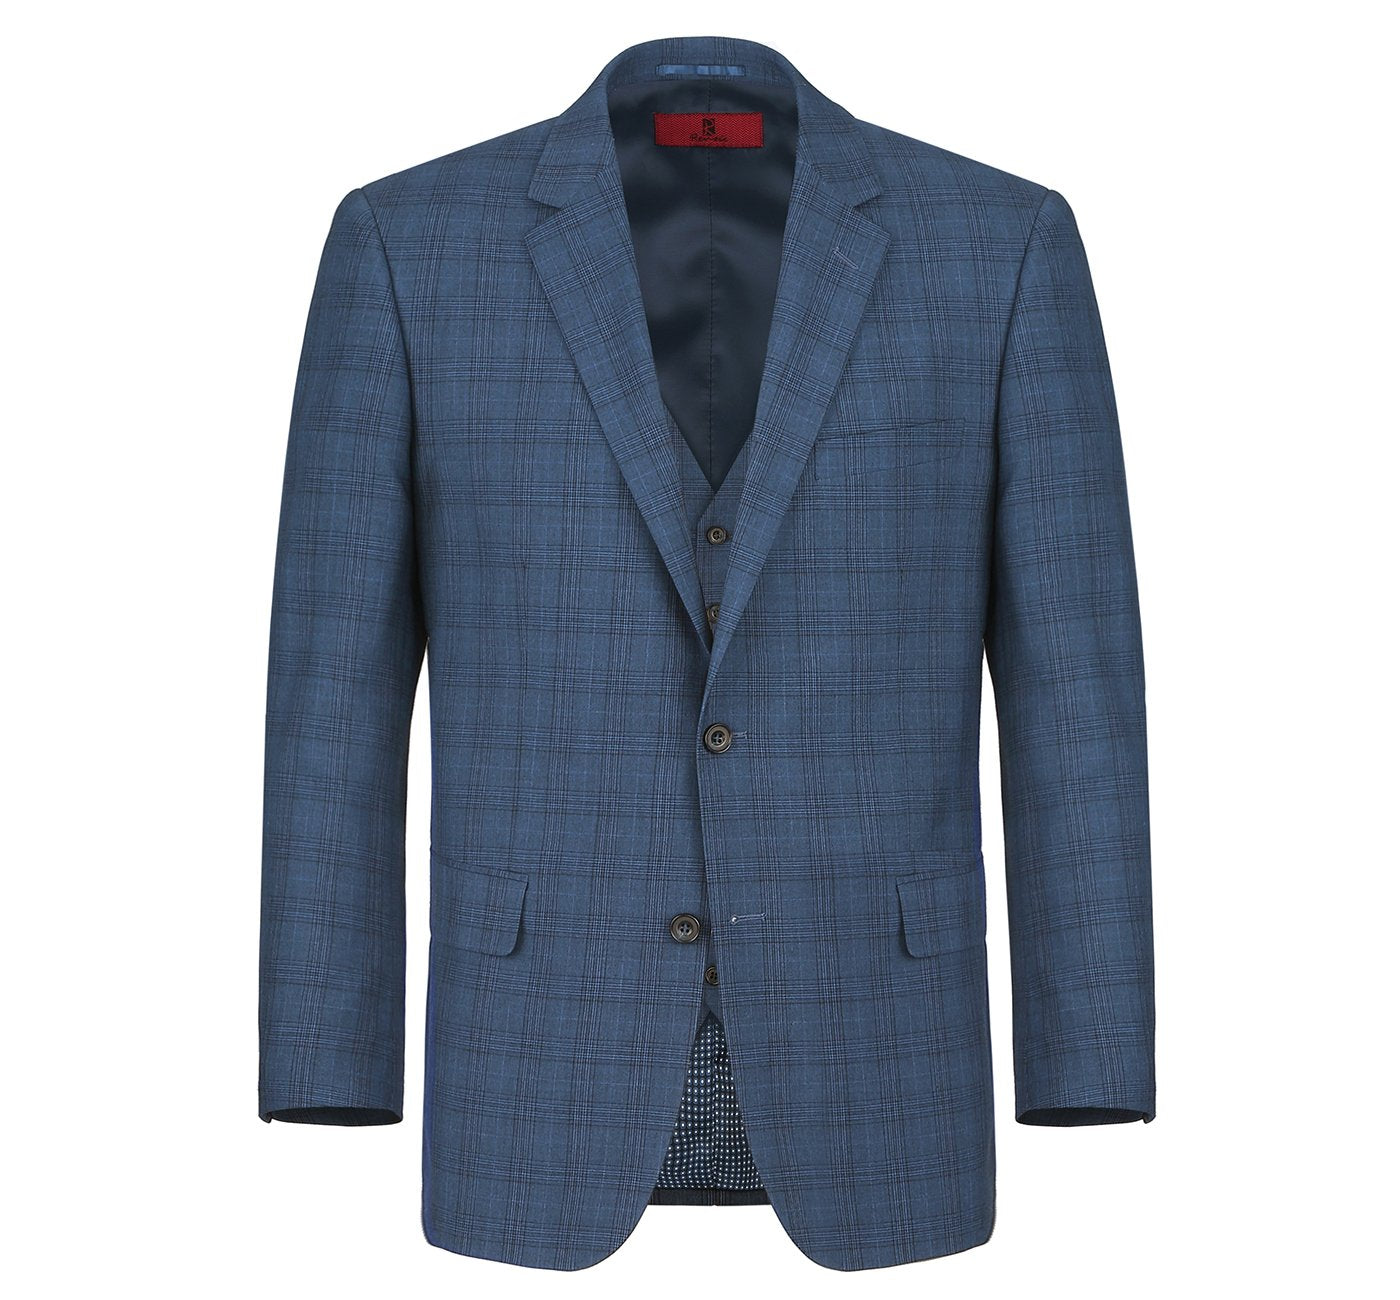 278-2 Men's 3-Piece Classic Fit Single Breasted Blue Windowpane Suit